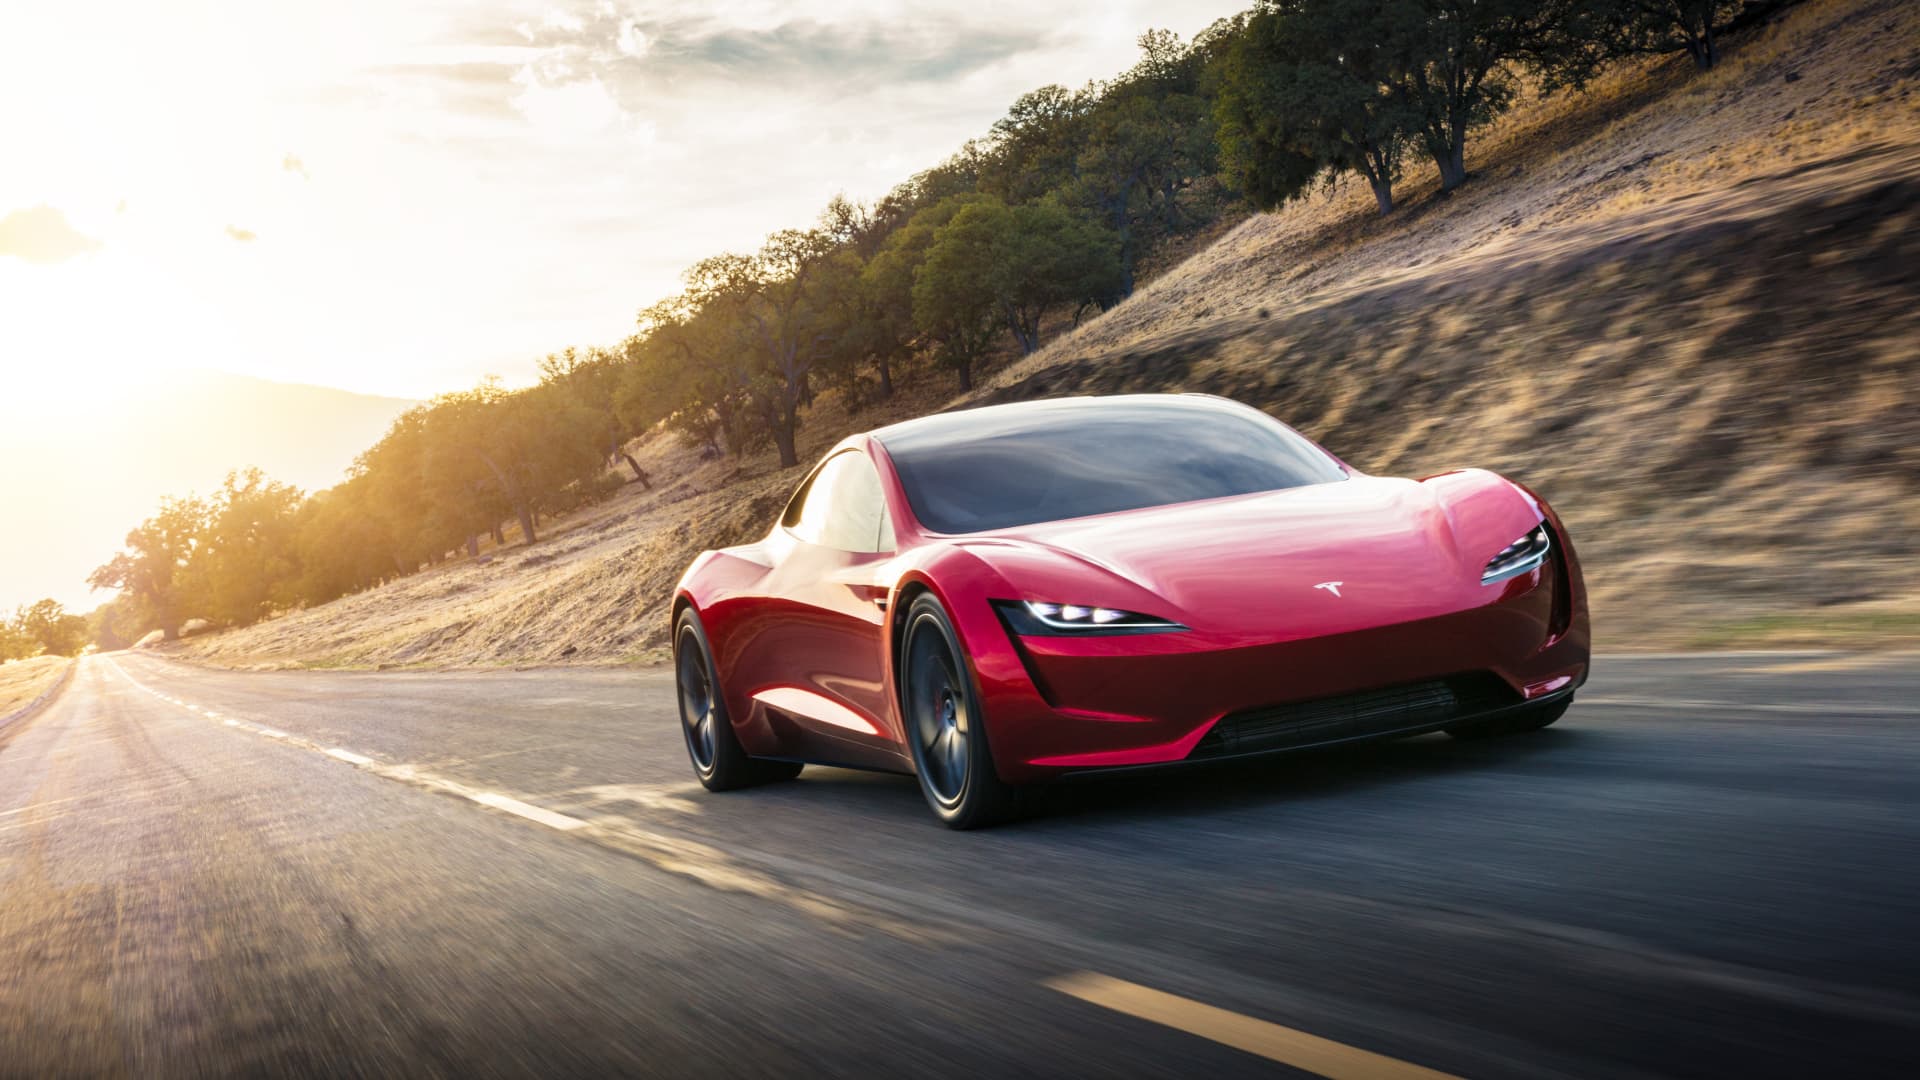 Elon Musk again promises next-generation Roadster, six years after first hyping it